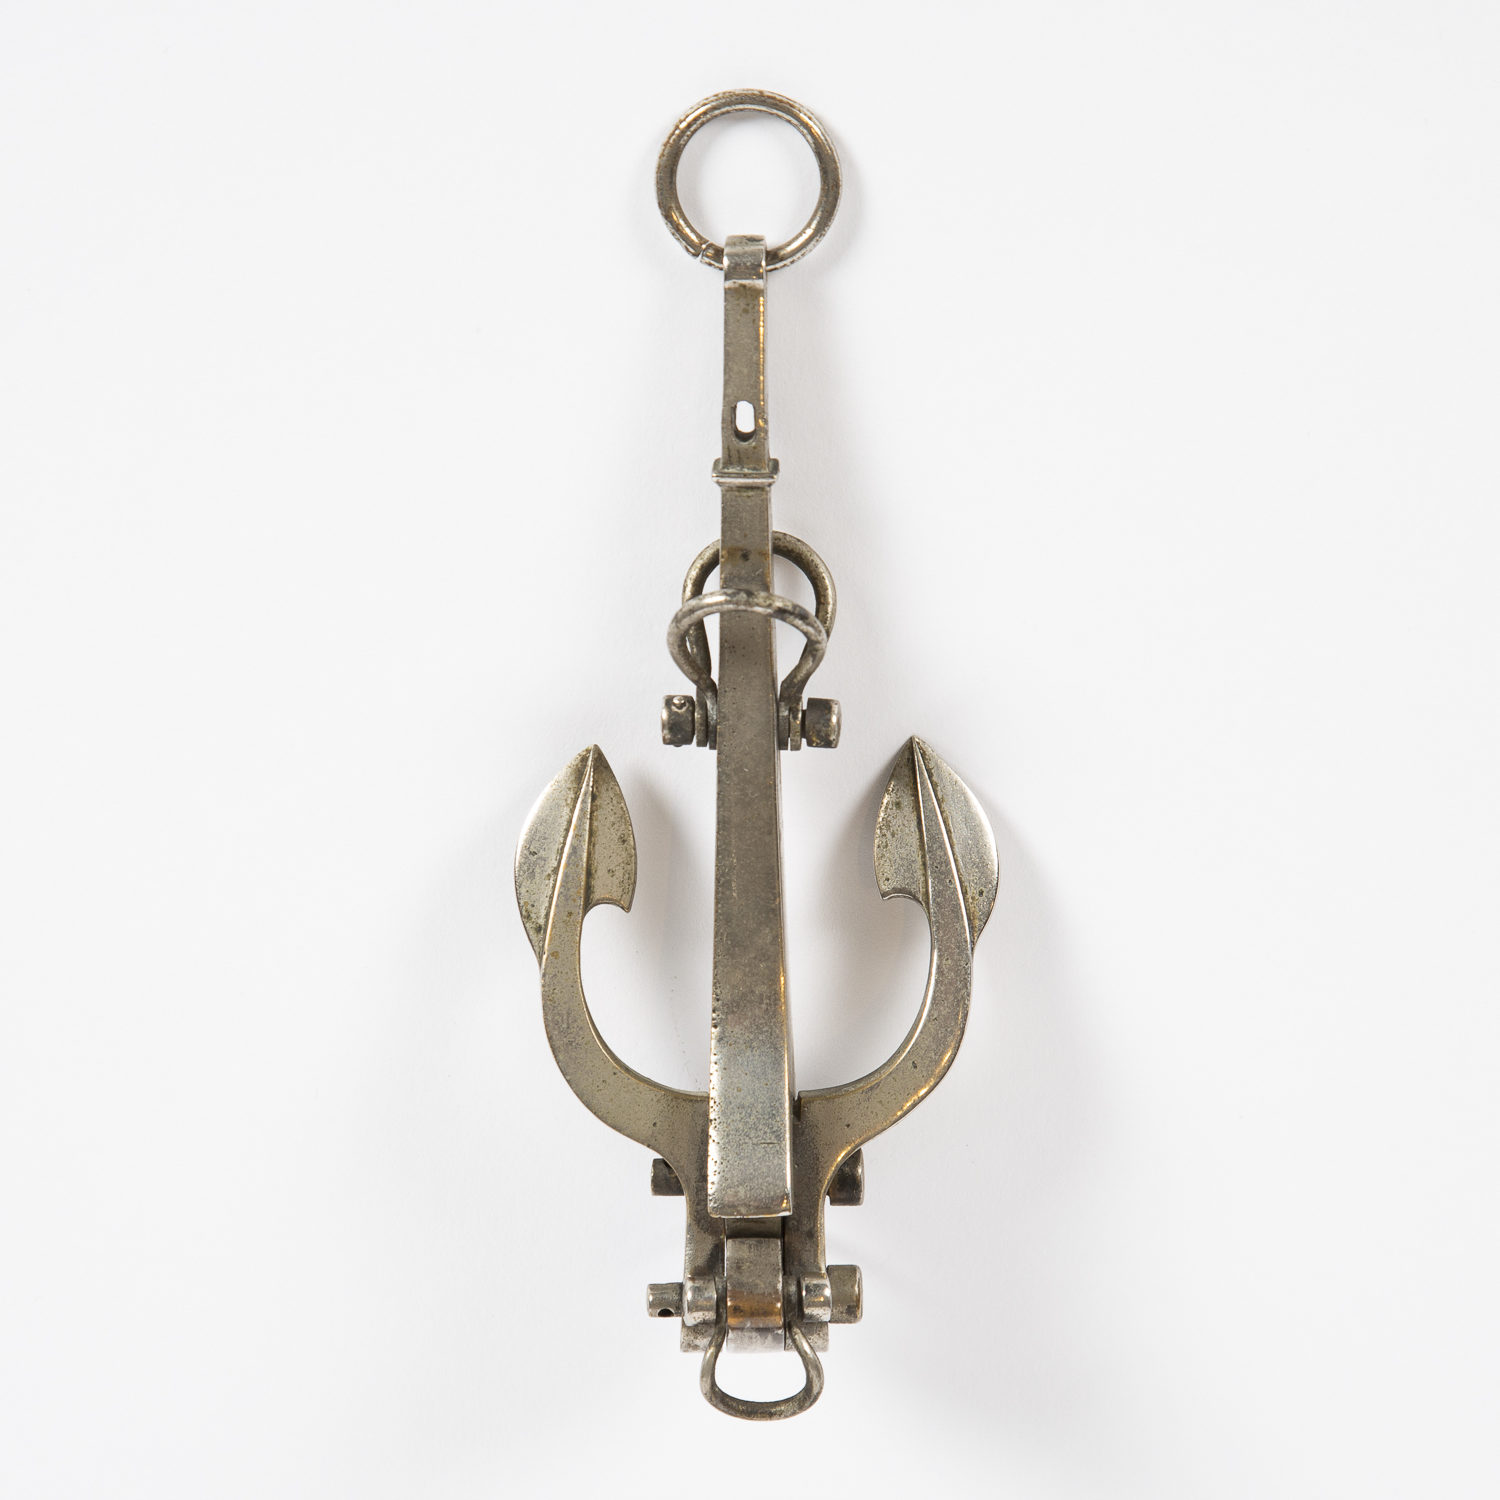 Scale model of a Naval double fluke stockless anchor